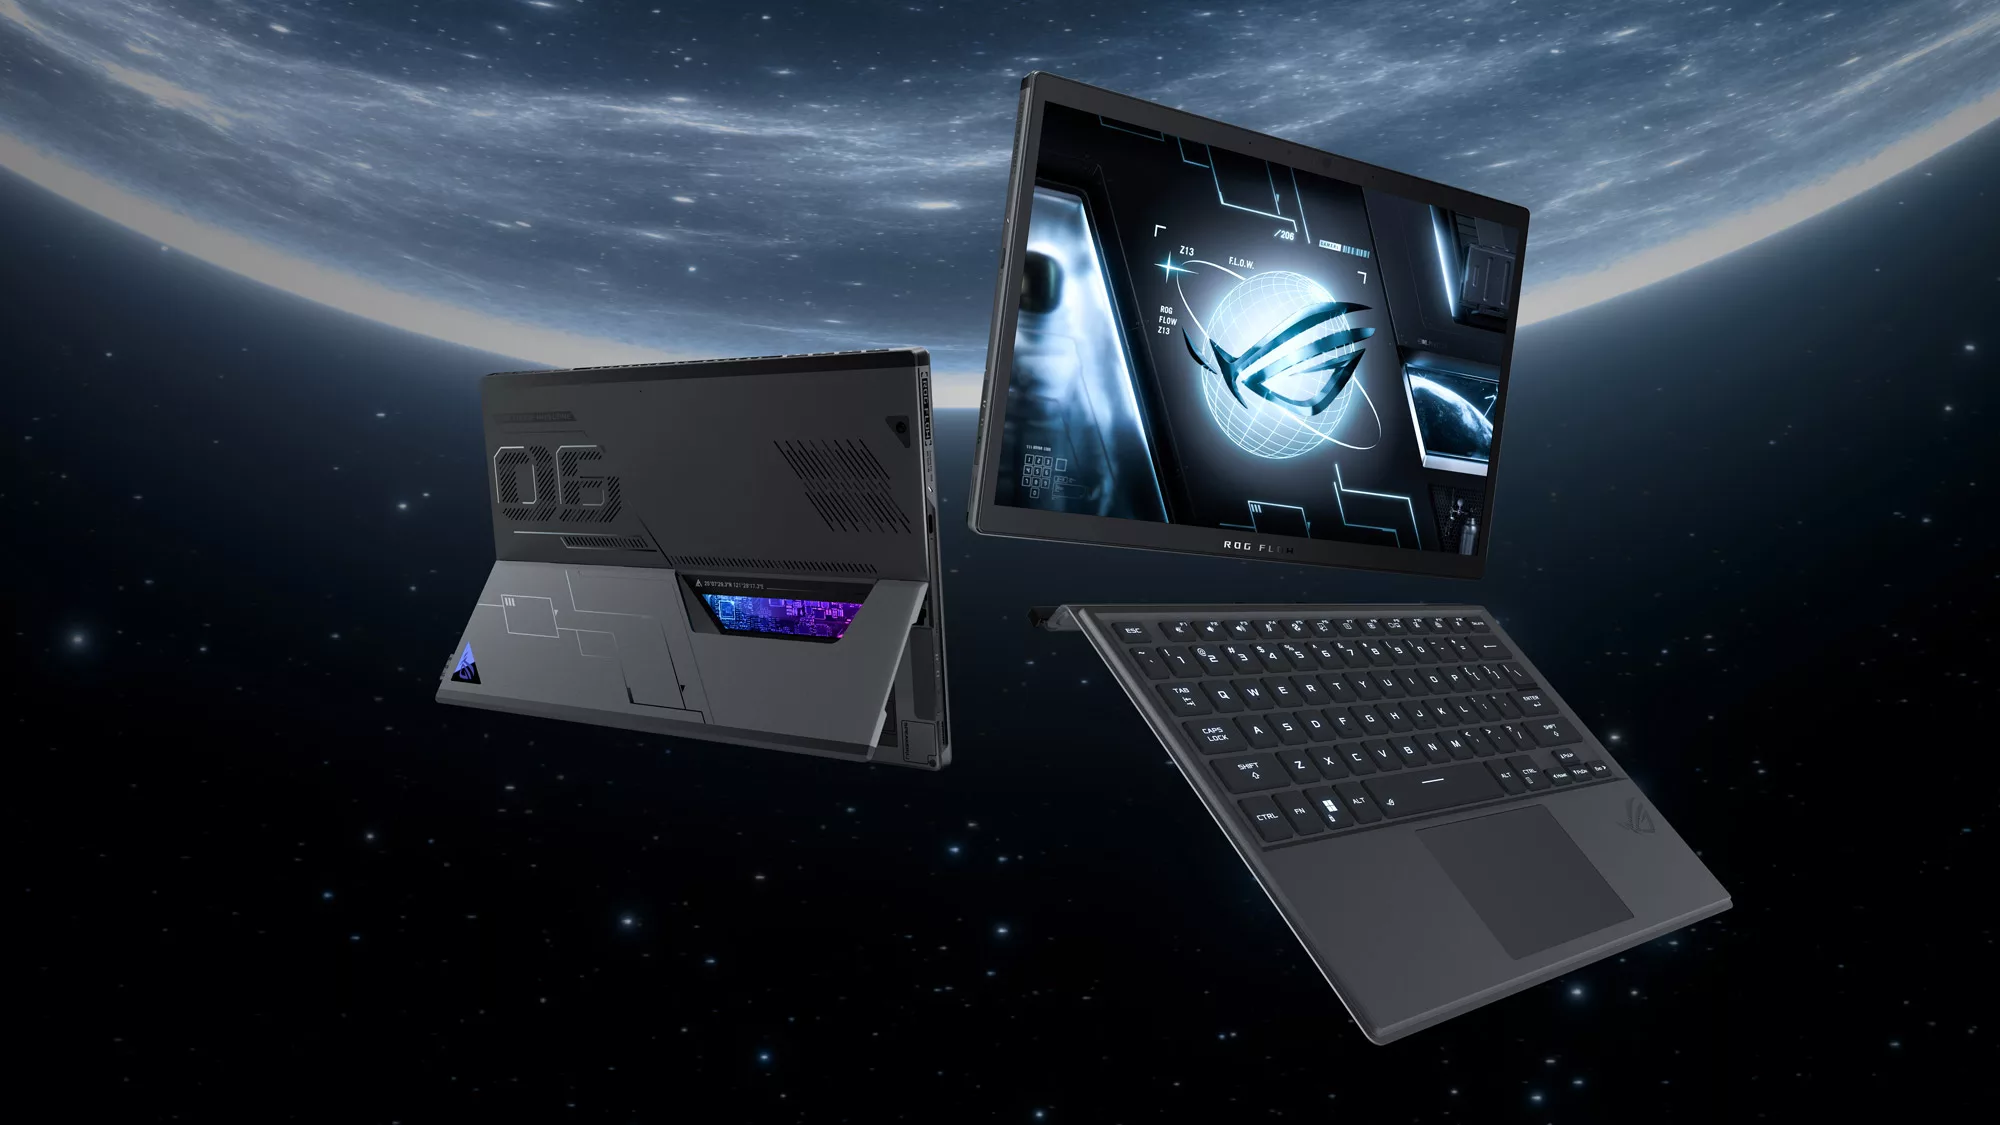 Two ROG Flow Z13s, one rear view and one front view with the detachable keyboard floating in space.